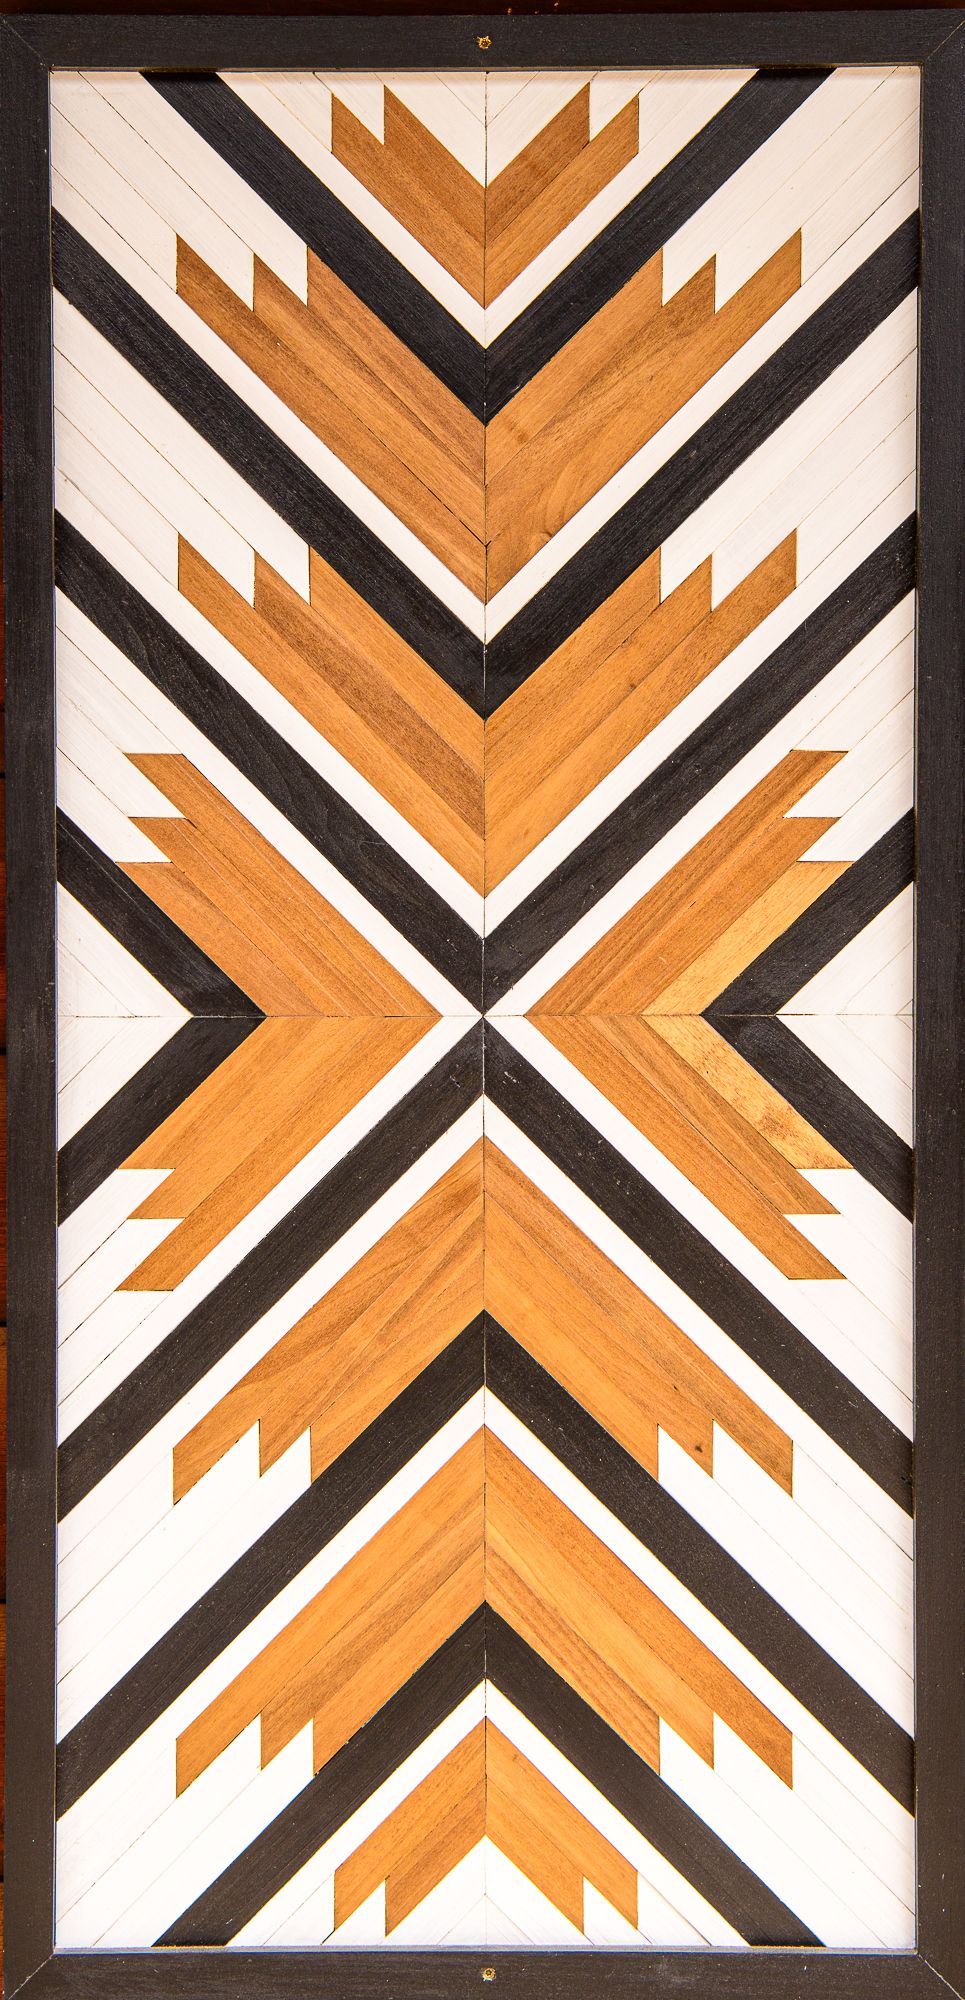 A wooden sculpture with a black and white pattern on it.